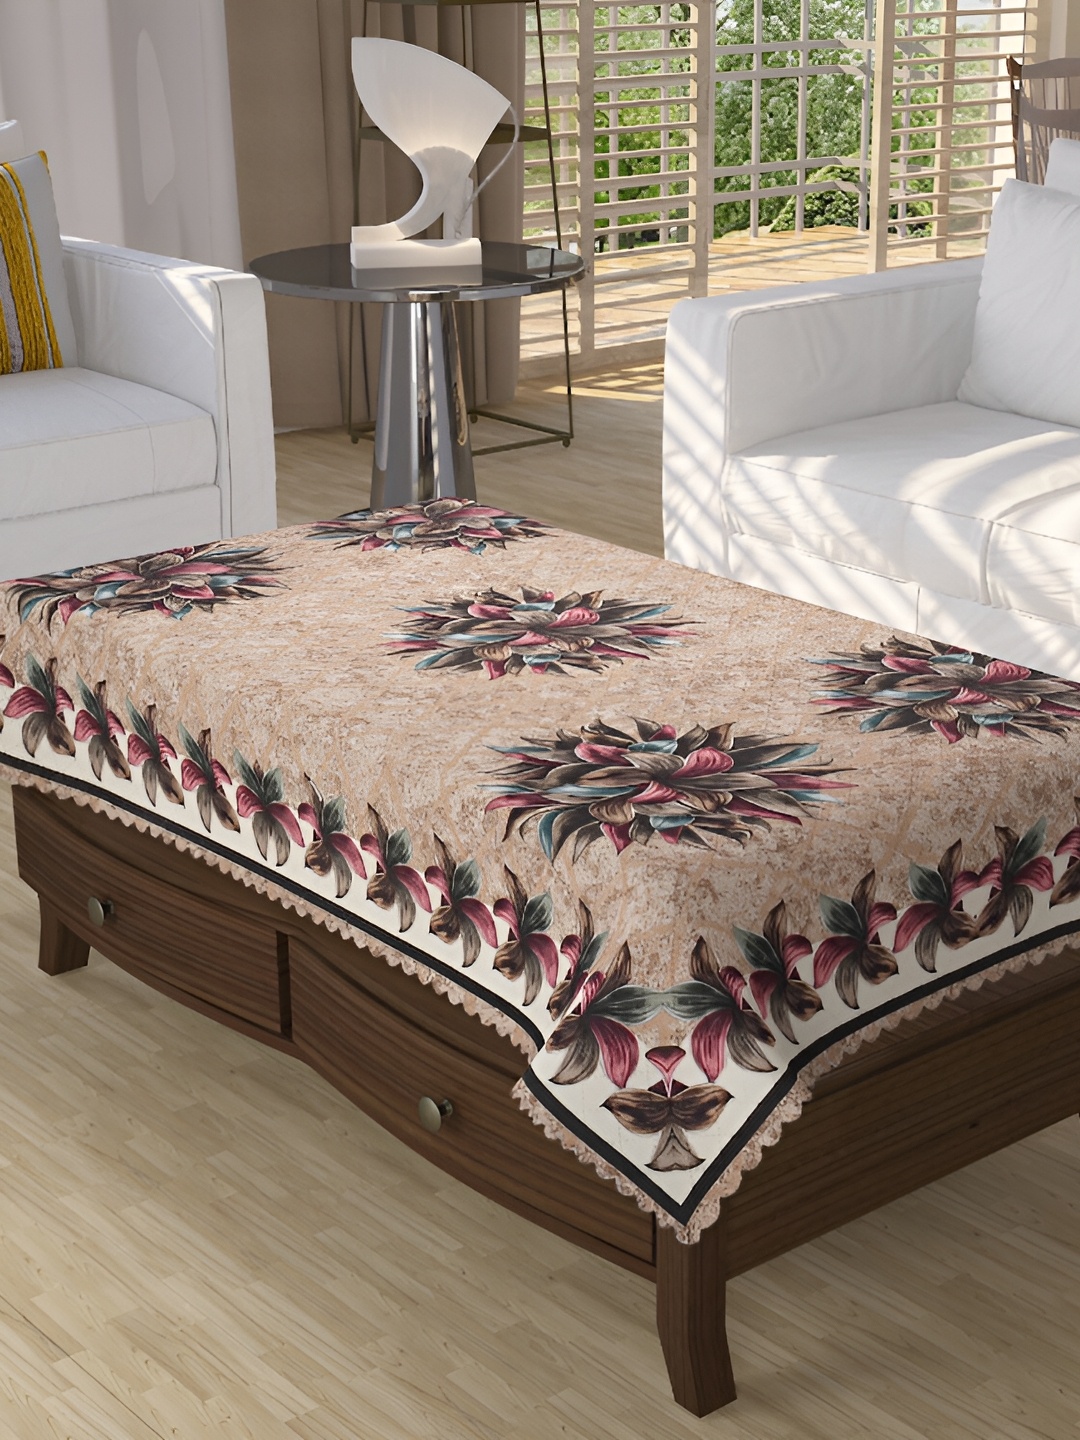 

BIGGER FISH Brown Floral Printed Rectangle 4 Seater Centre Table Cover